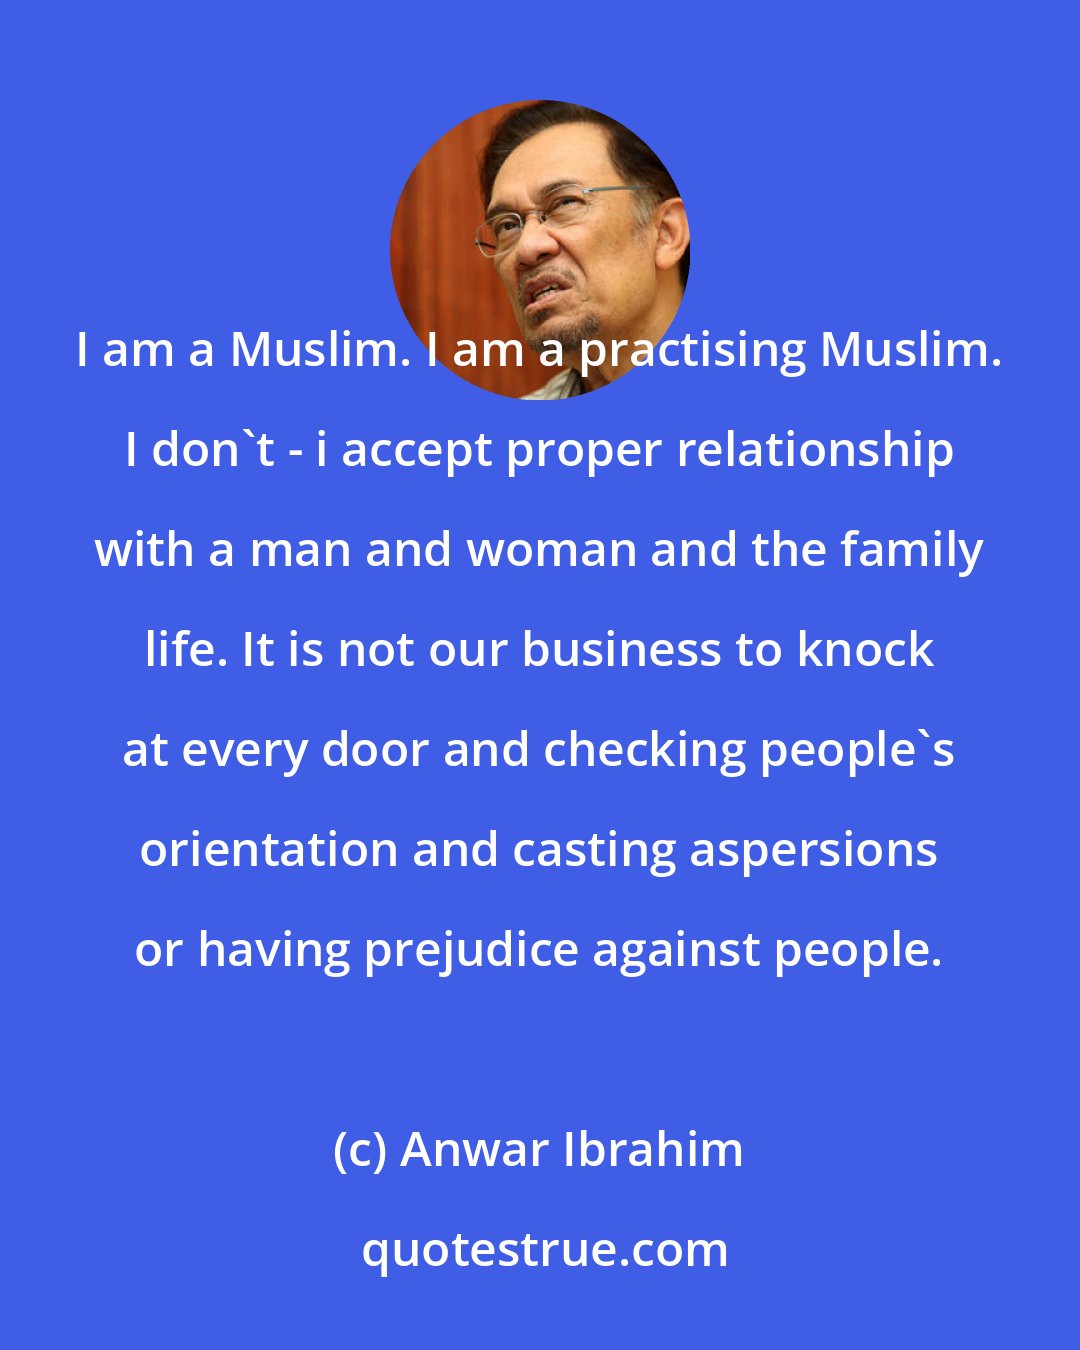 Anwar Ibrahim: I am a Muslim. I am a practising Muslim. I don't - i accept proper relationship with a man and woman and the family life. It is not our business to knock at every door and checking people's orientation and casting aspersions or having prejudice against people.